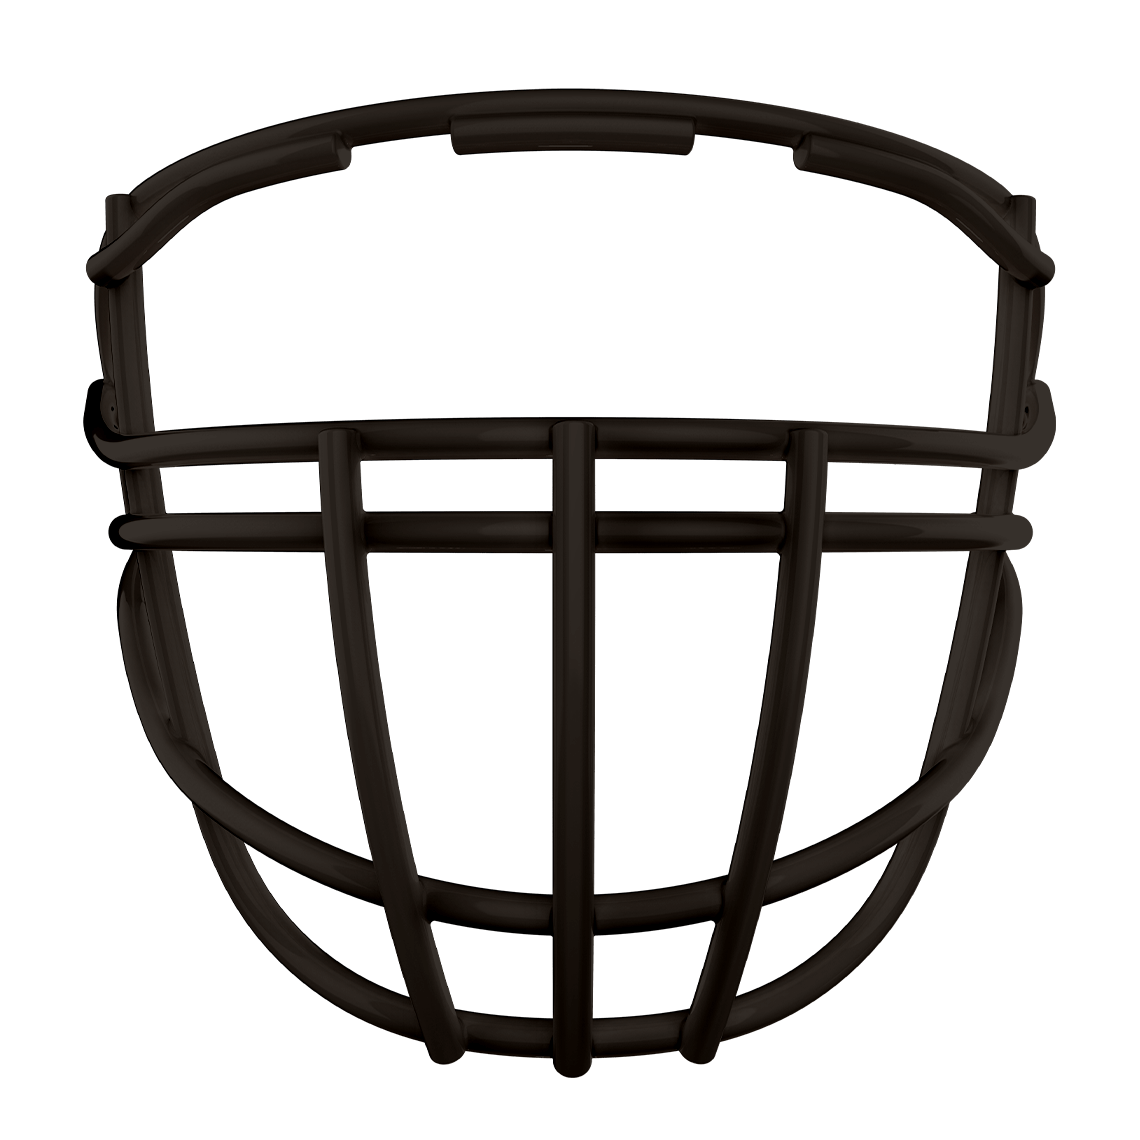 football helmet drawing front view